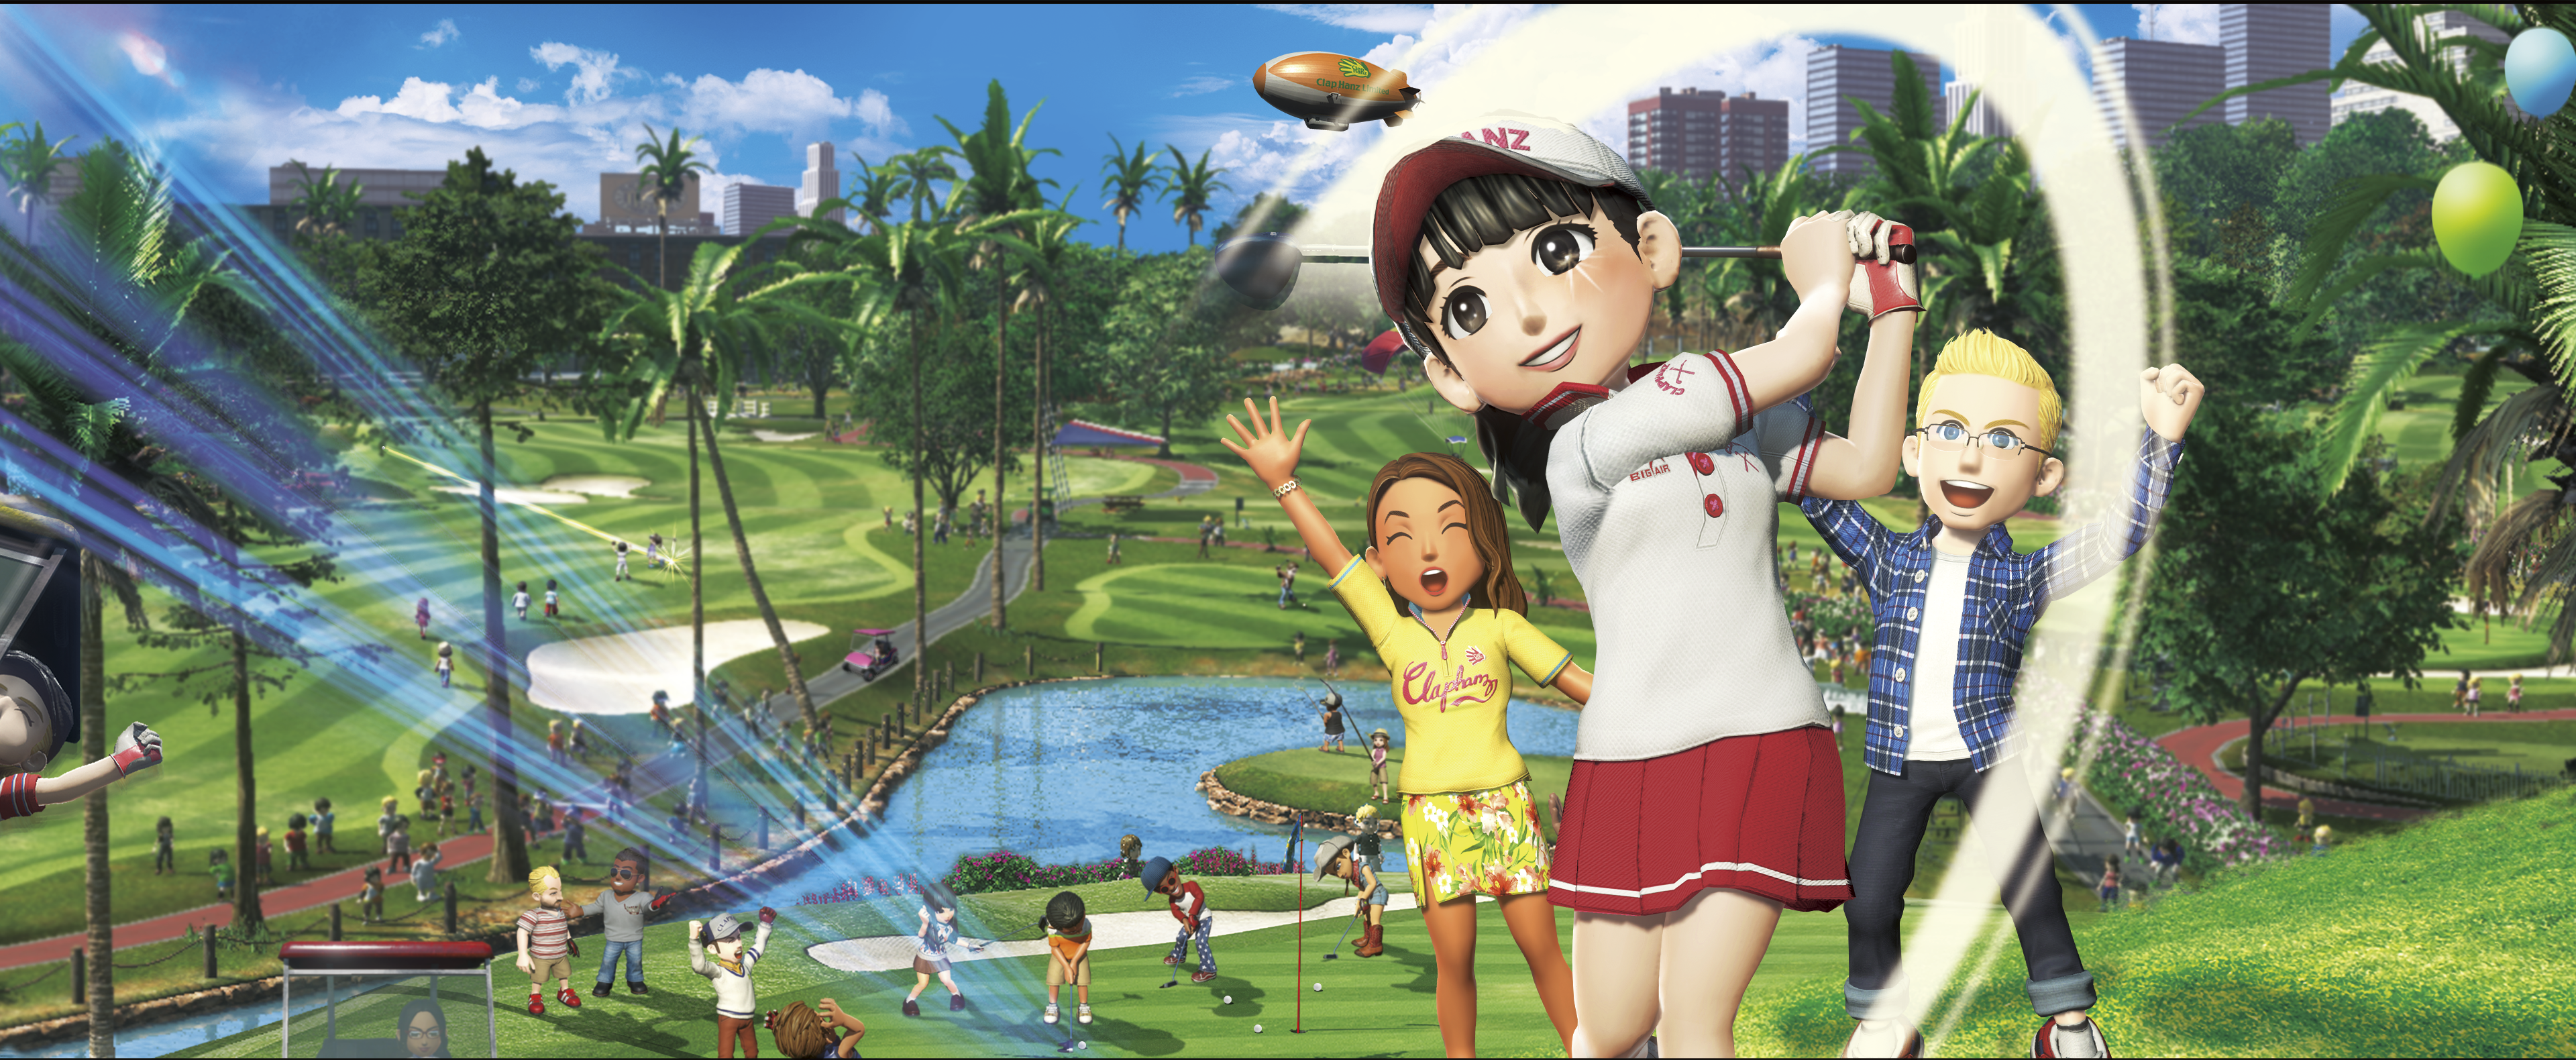 Everybody’s Golf – PS4